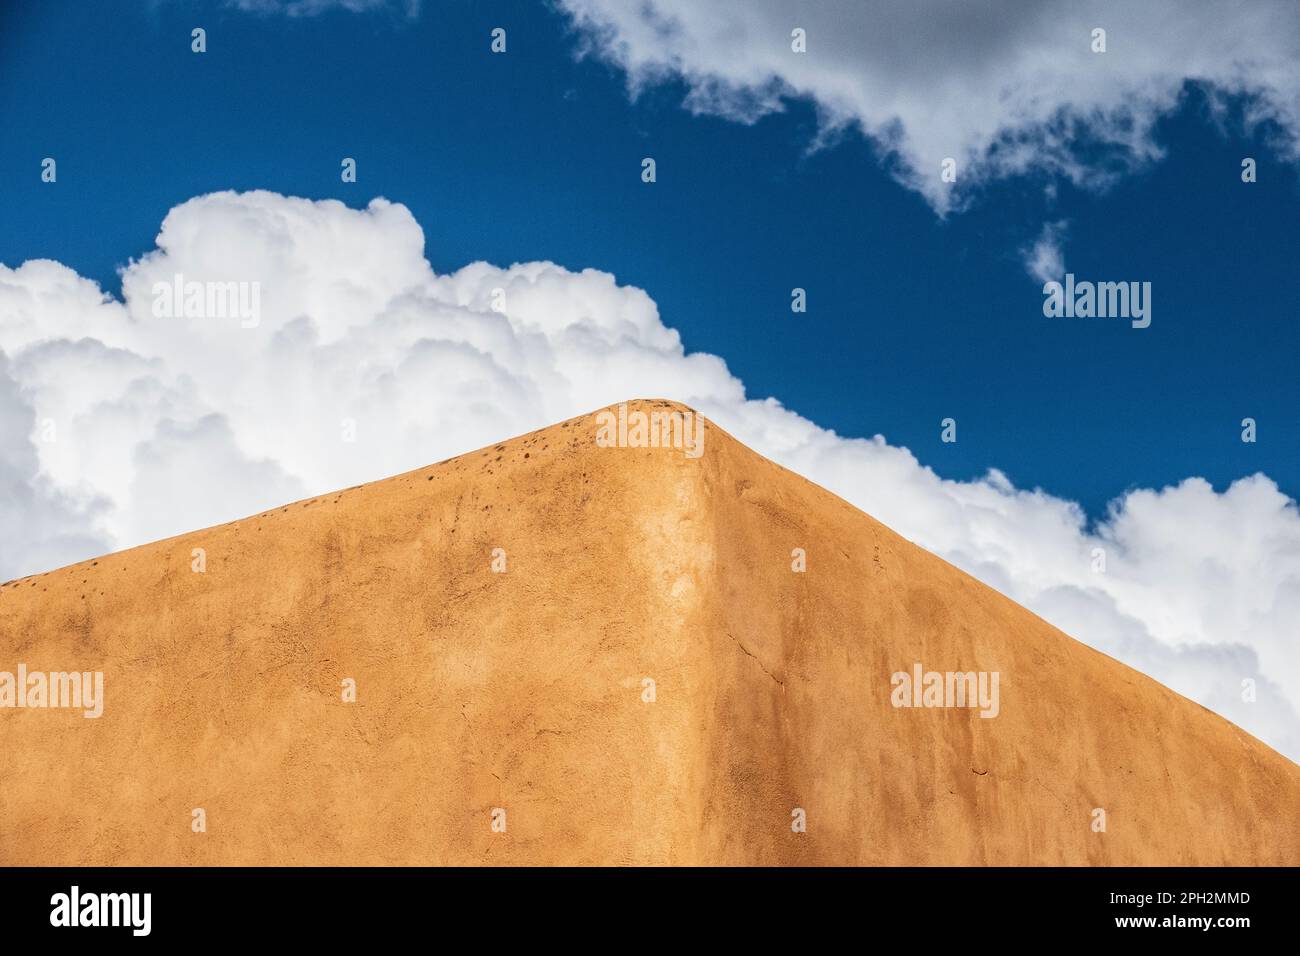 Adobe clad walls of a building in Taos New Mexico in shot against a blue sky with fluffy cumulus clouds Stock Photo